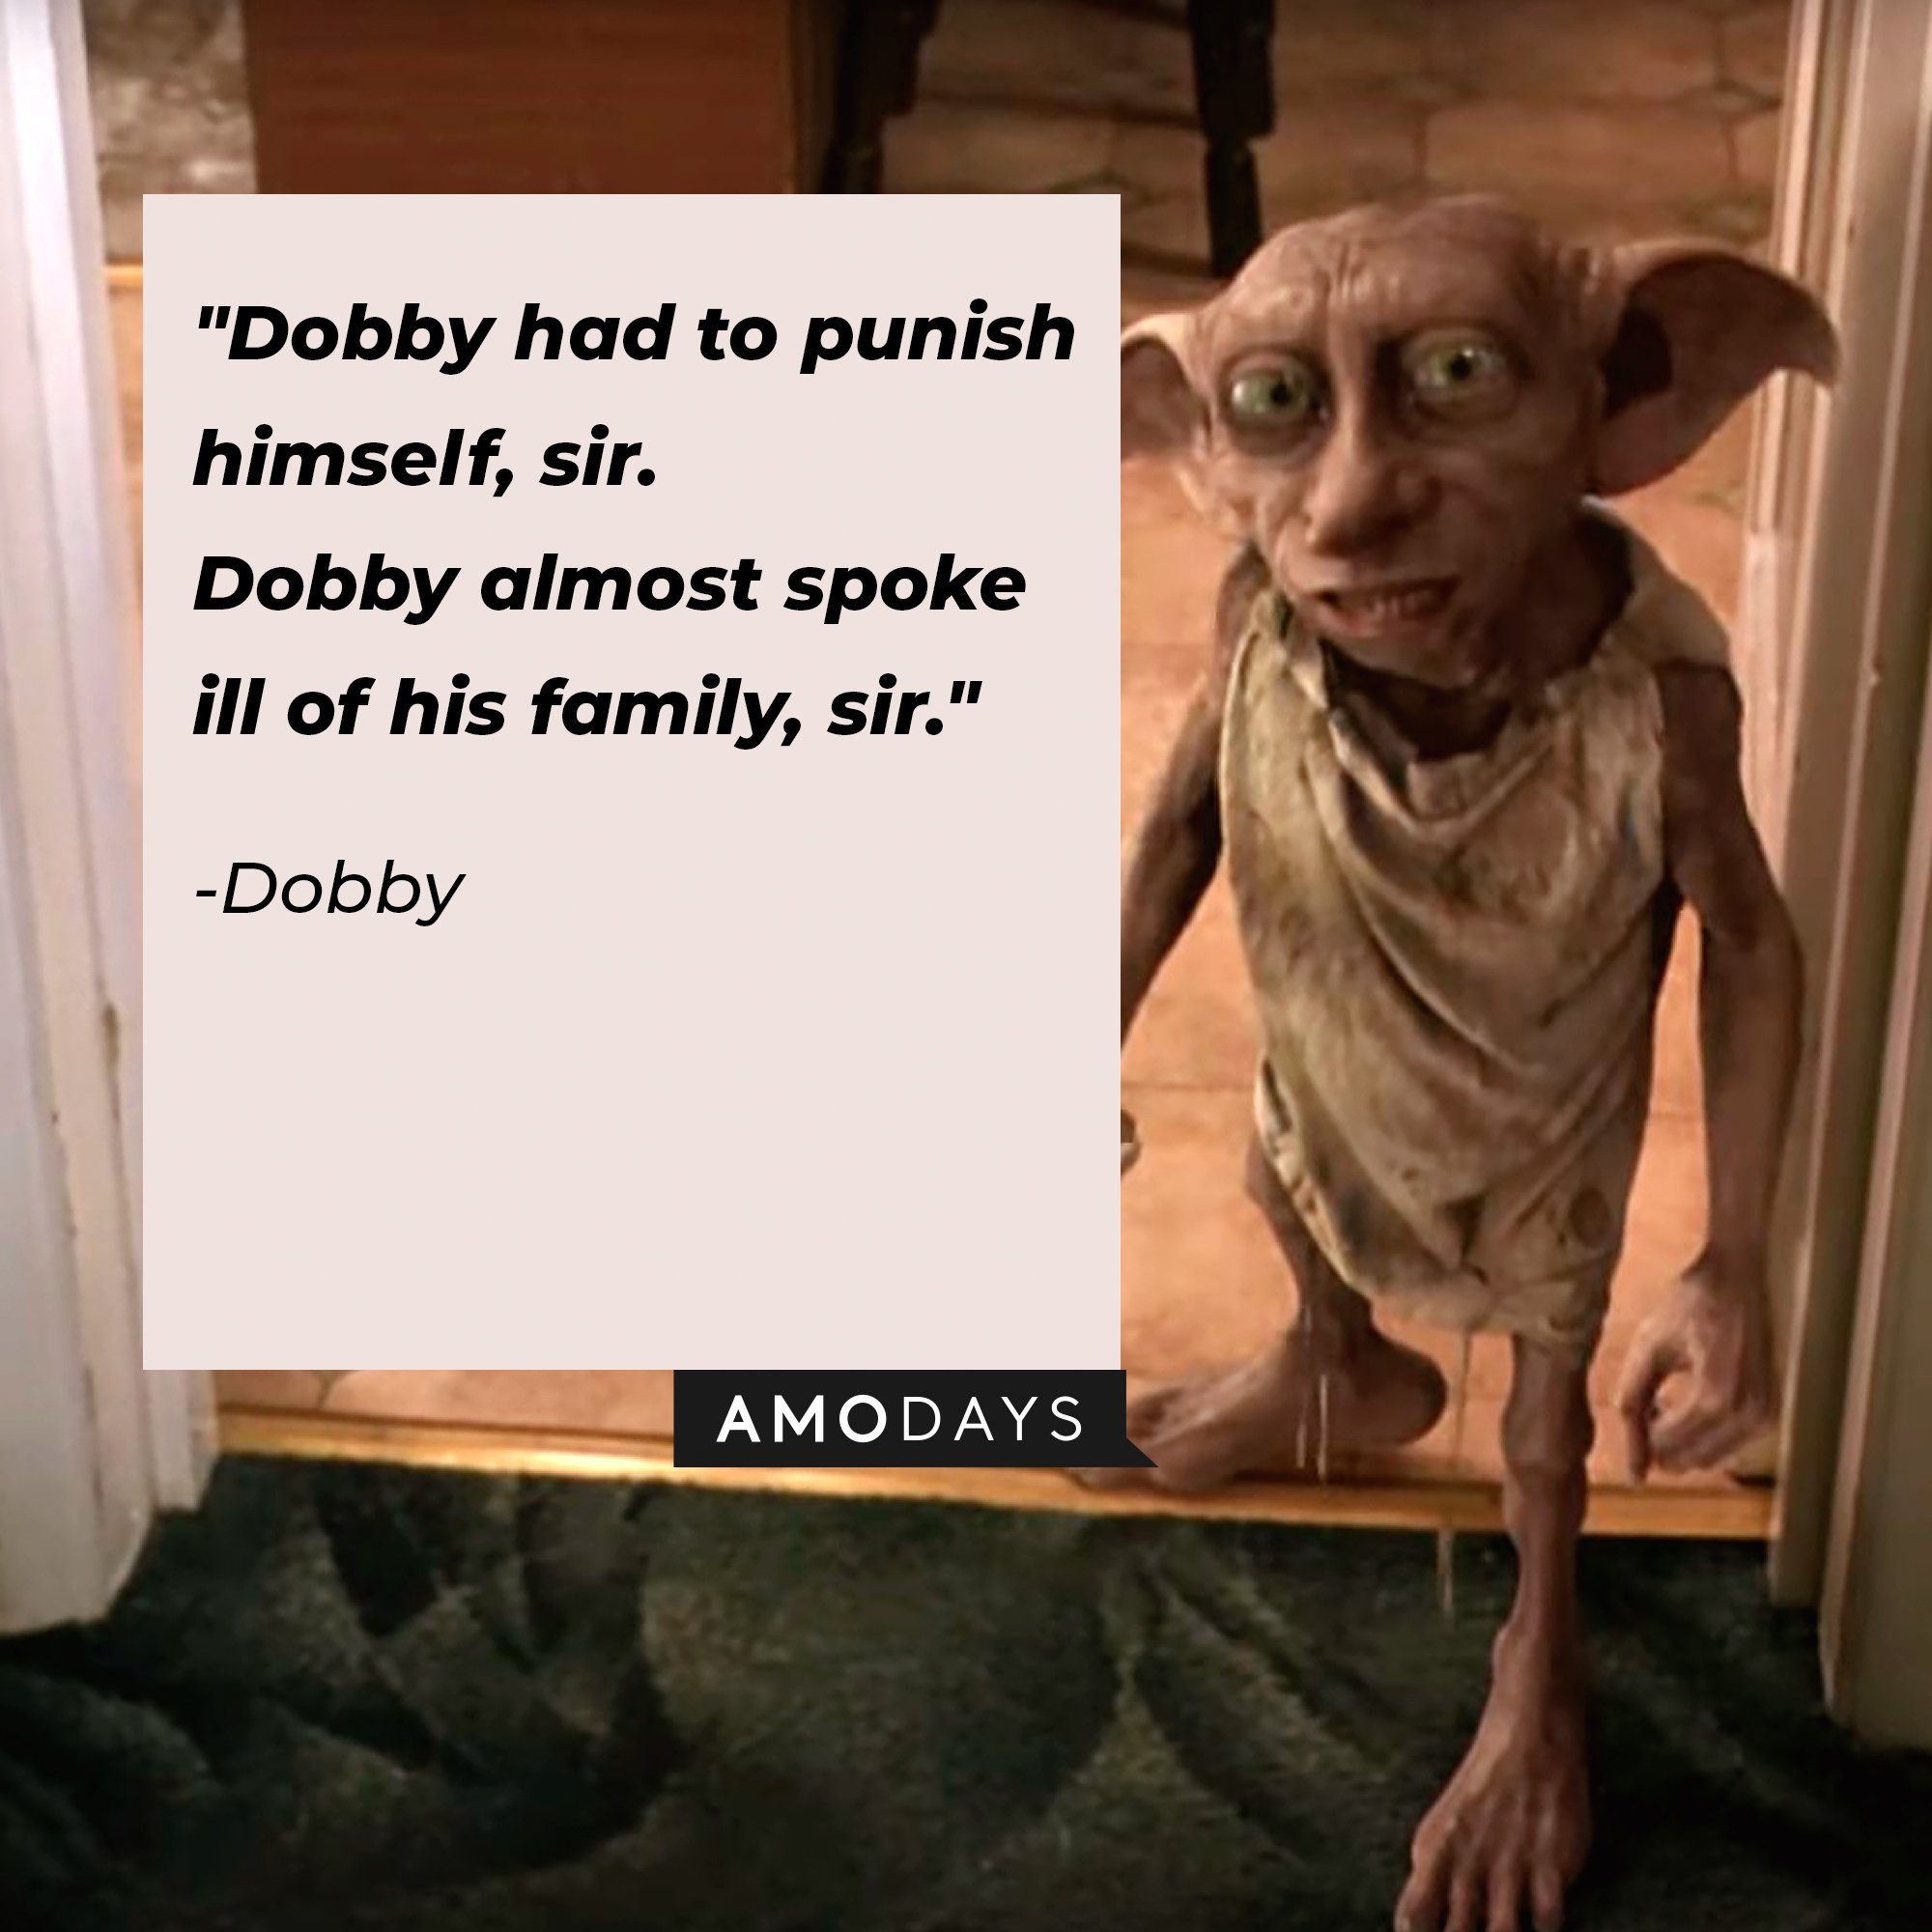 Dobby’s quote: "Dobby had to punish himself, sir. Dobby almost spoke ill of his family, sir." | Image: AmoDays